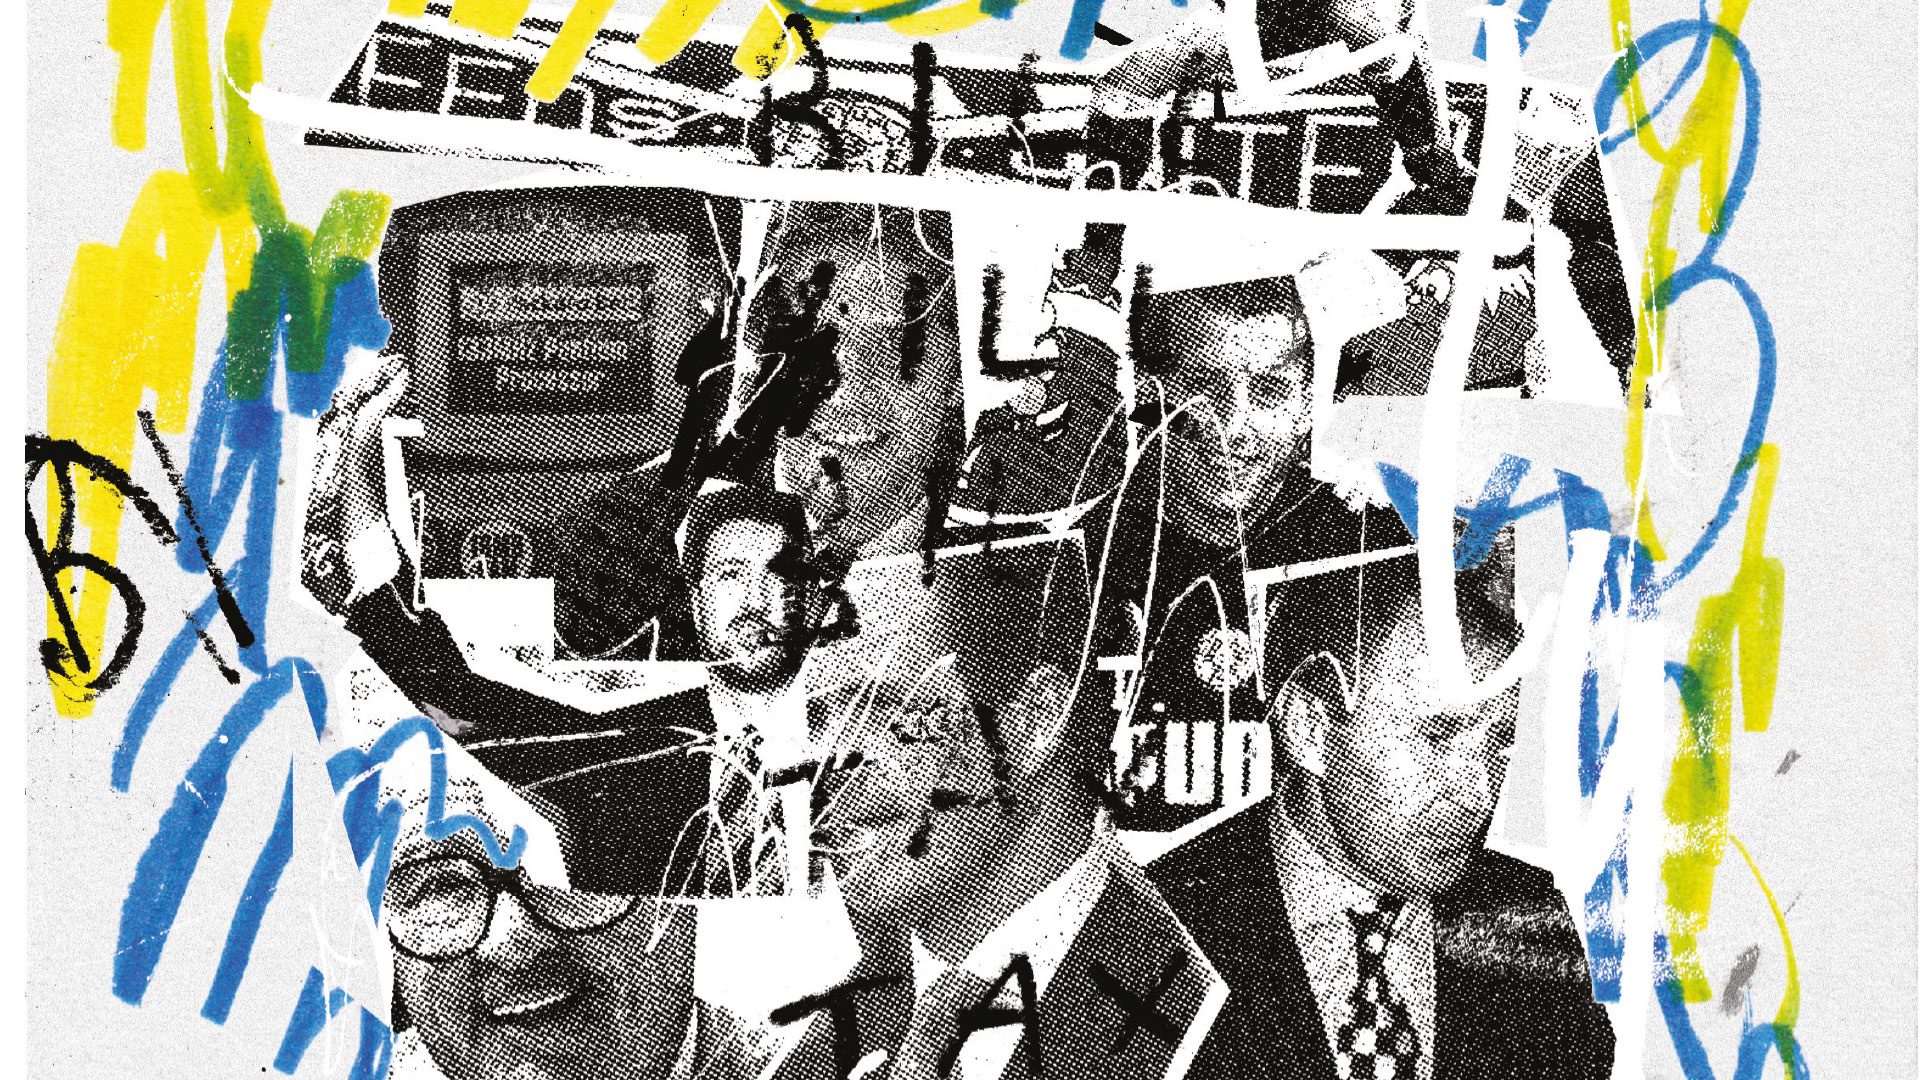 A collage by Joe Gamble showing characters involved in the chaotic summer of 1996